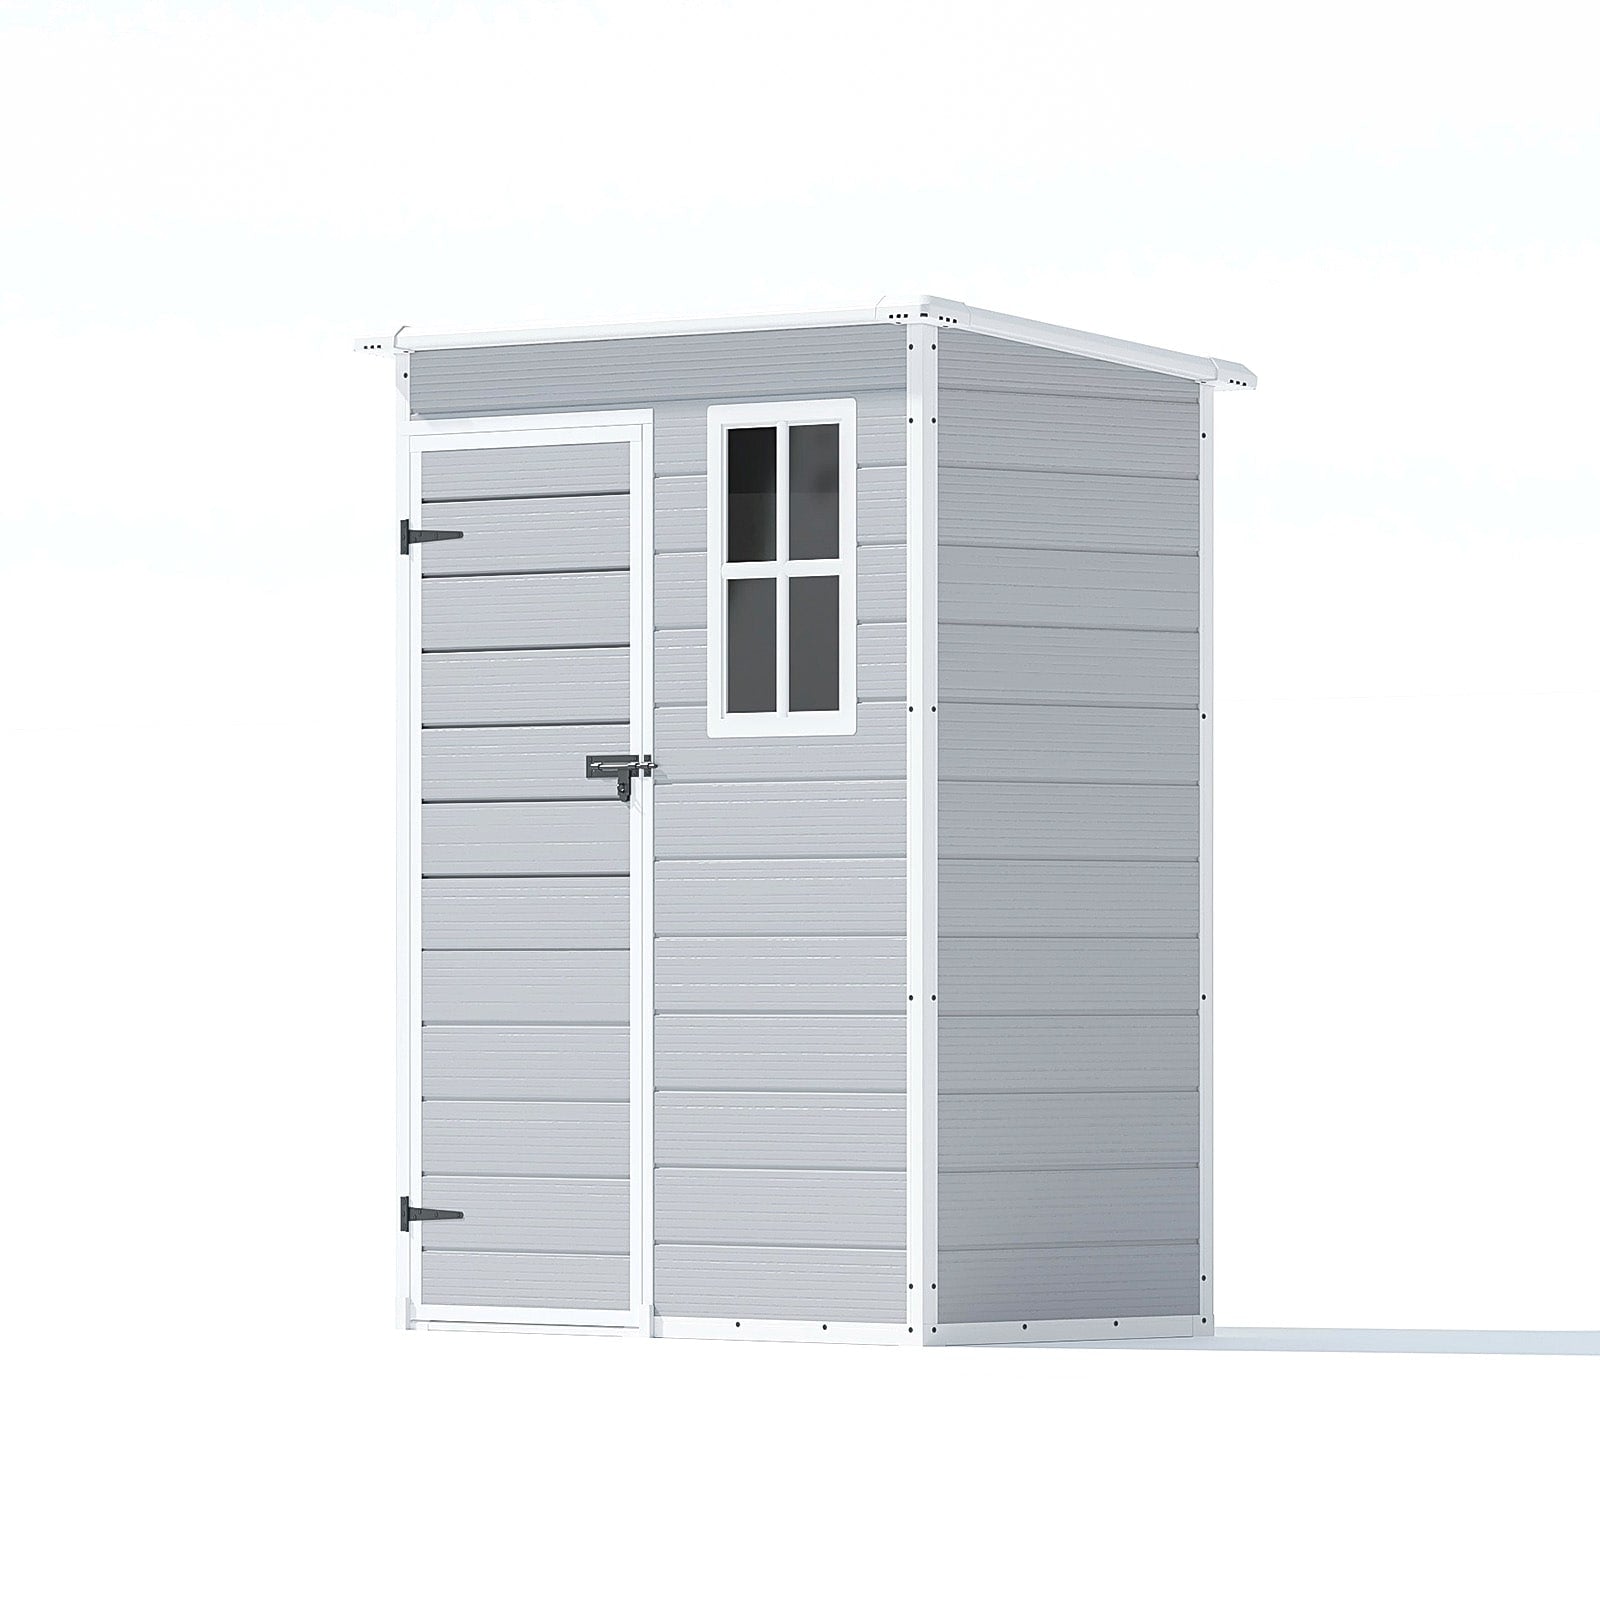 Patiowell 5x3 Plastic Shed-1